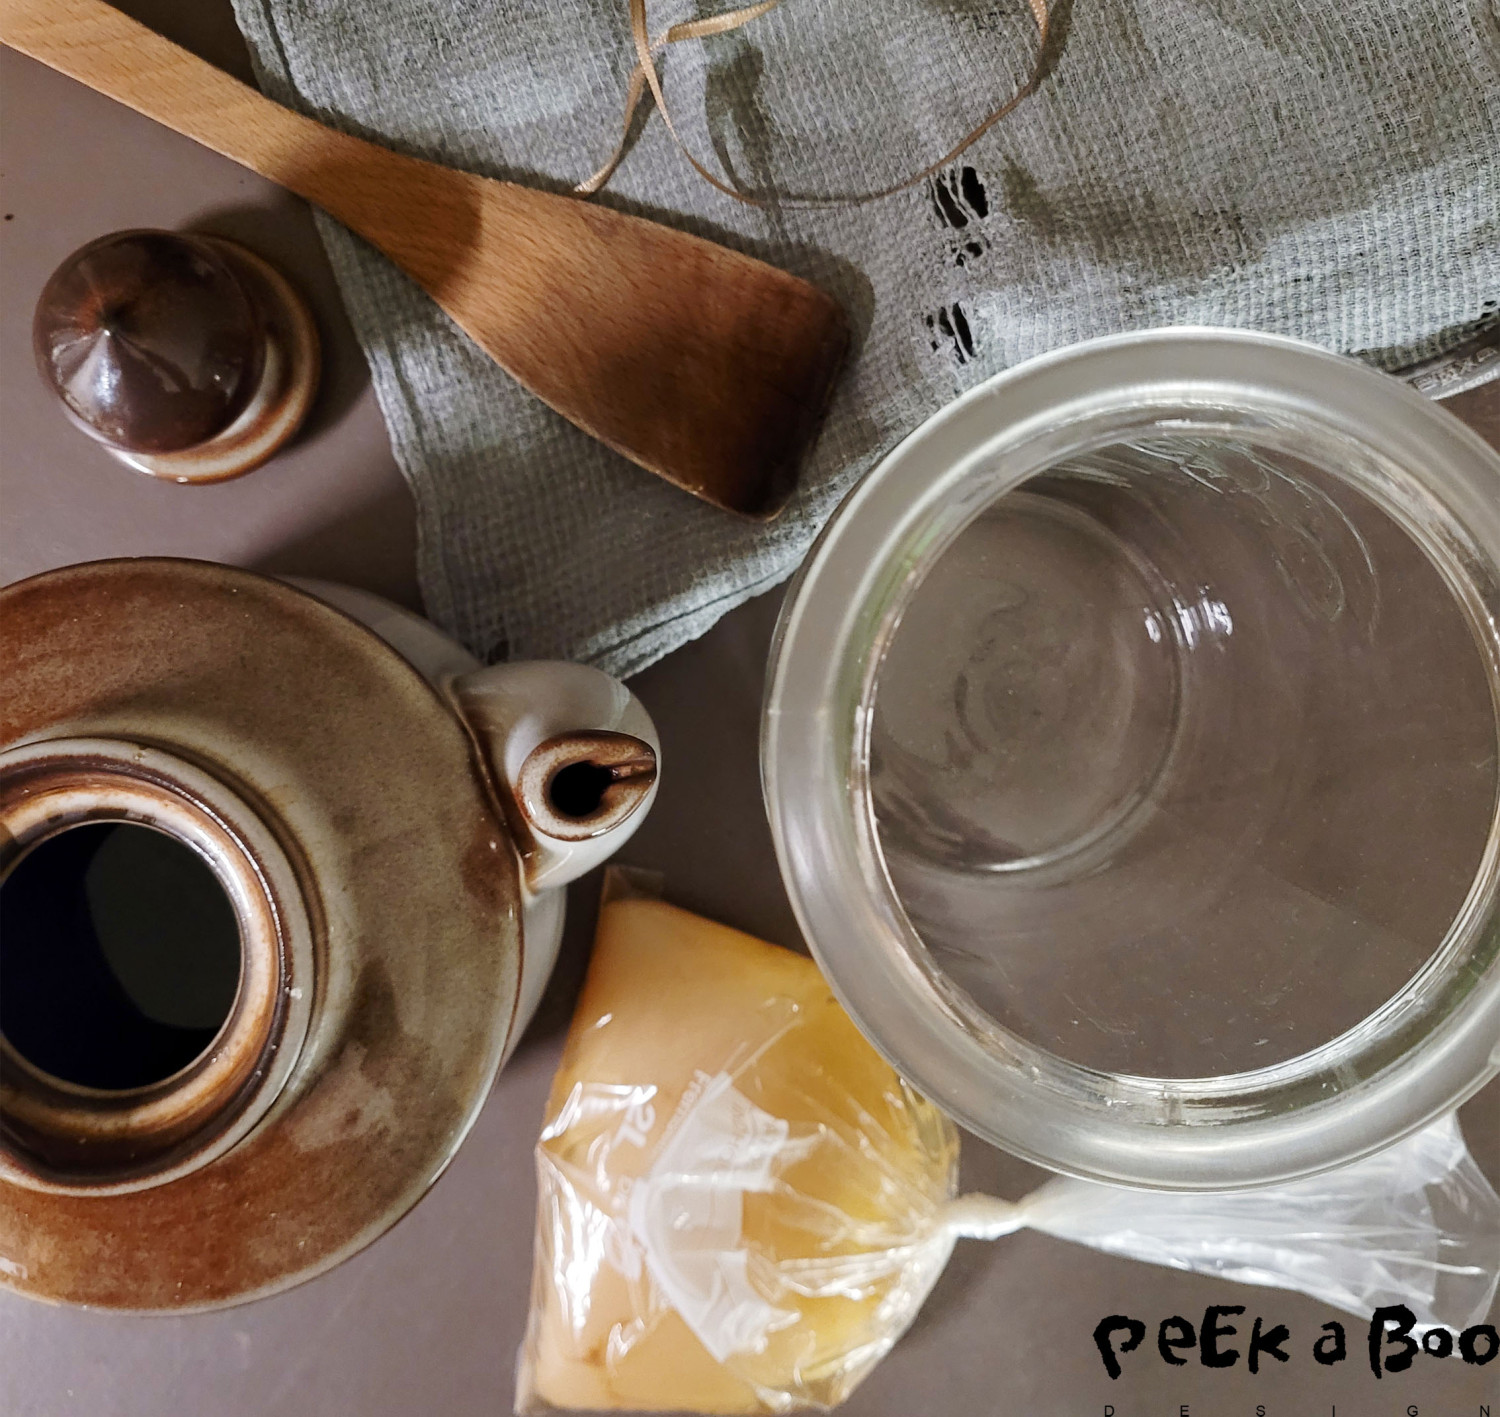 These are the things you need for brewing Kombucha.